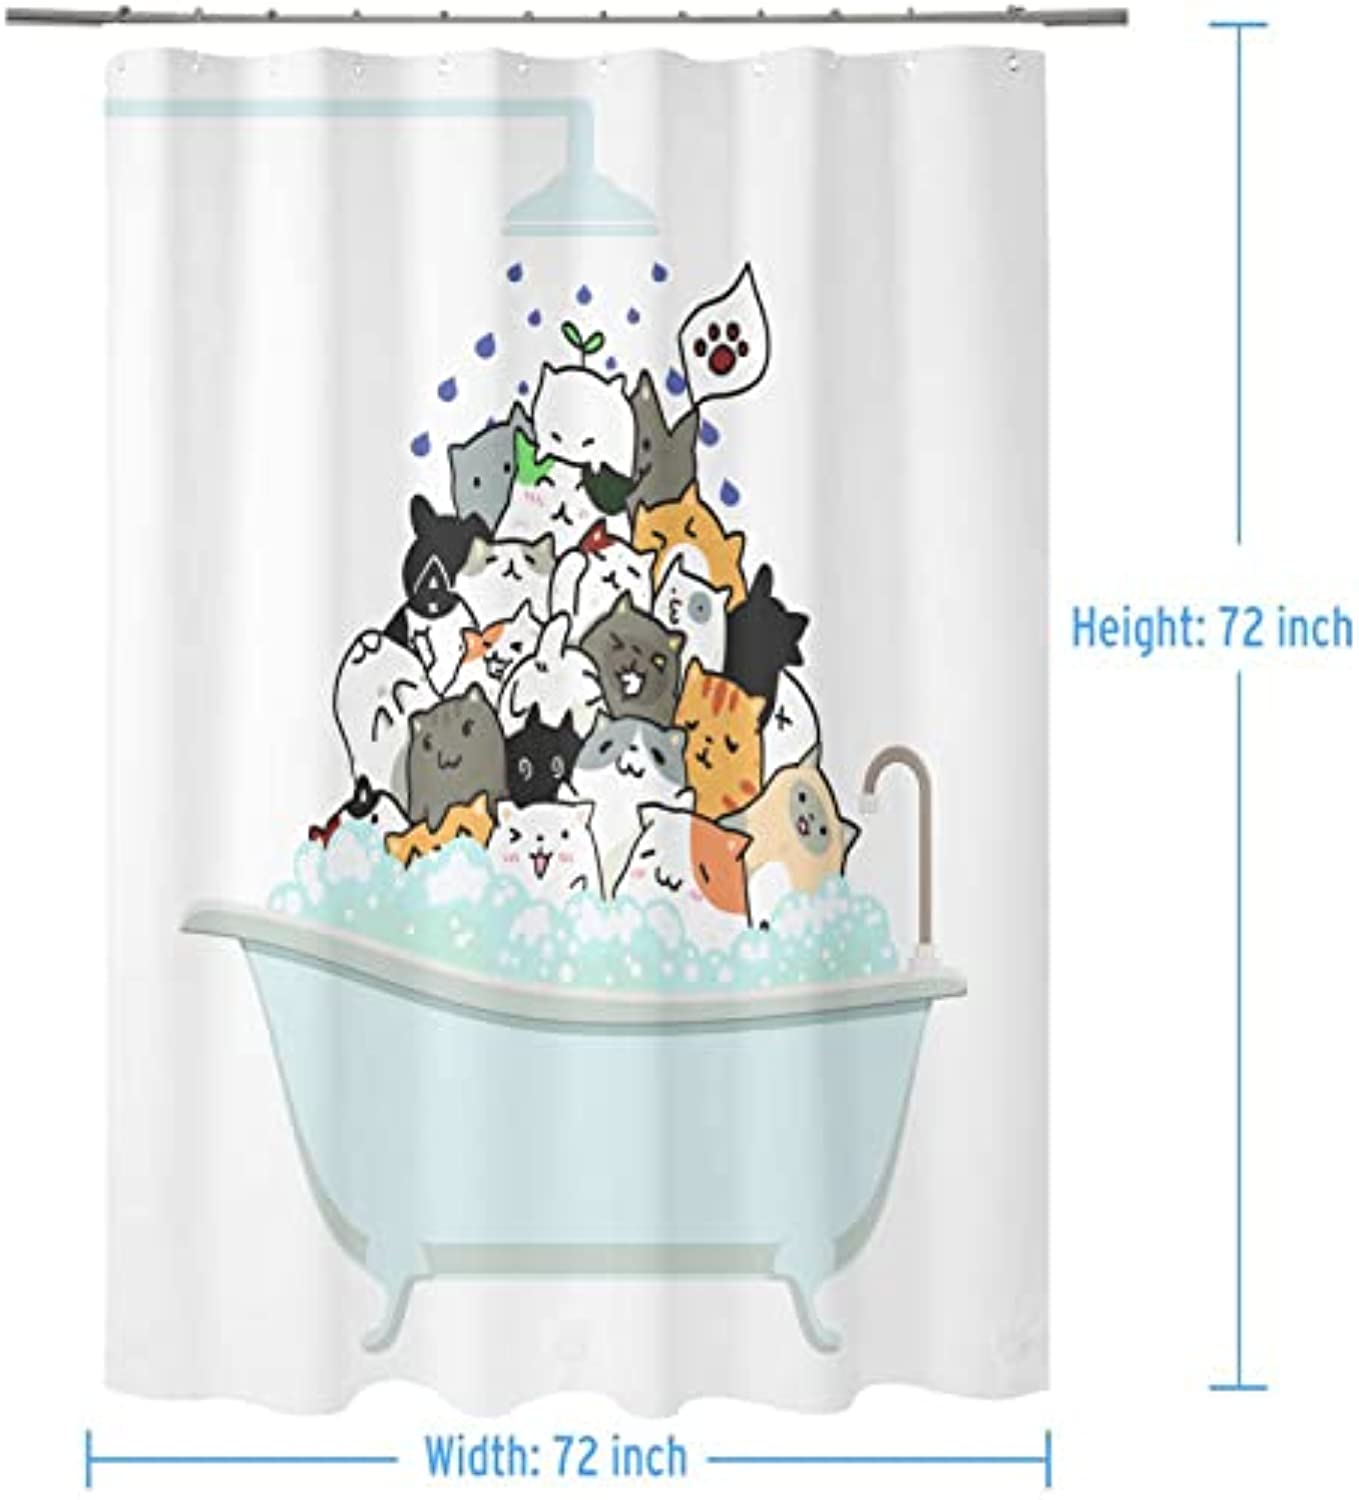 Cute Funny Cats Shower Curtain Kwaii Pets Colorful Hilarious Bath Curtain Cartoon Cat Paw Blue Tub Waterproof Fabric Polyester Curtain for Bathroom  with 12 Hooks  72x72